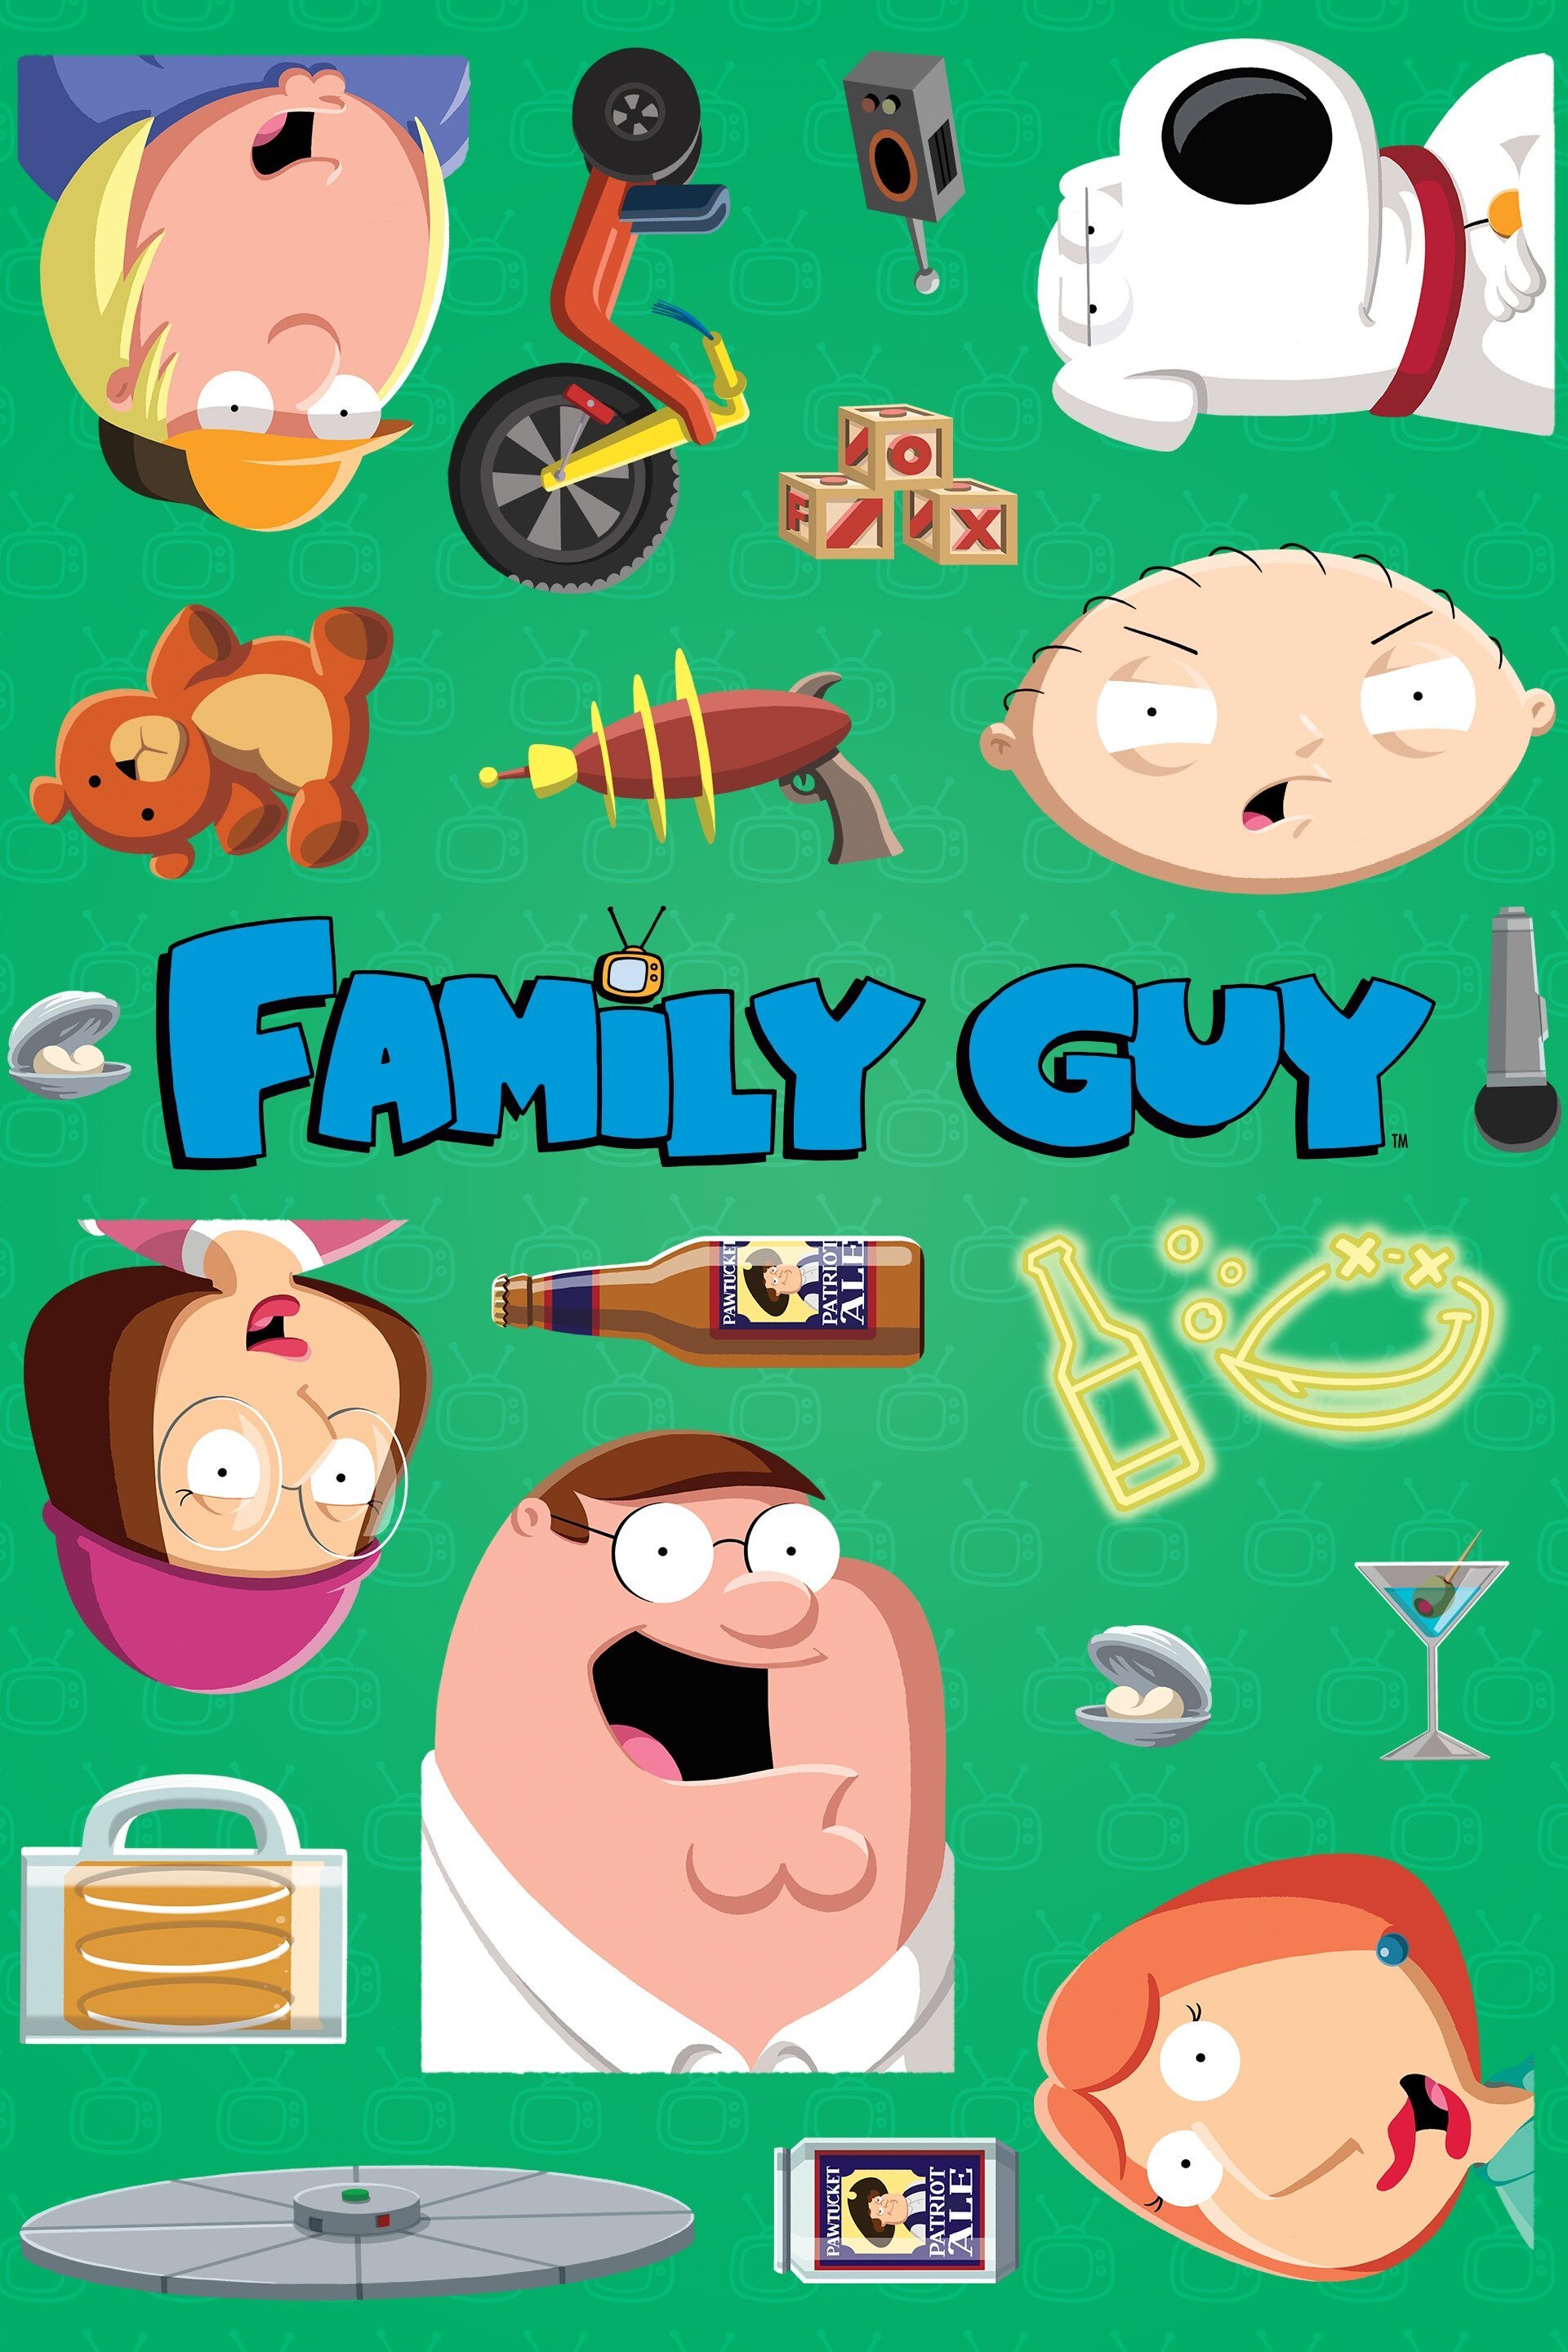 I Used AI To Generate This Family Guy Scene : r/familyguy